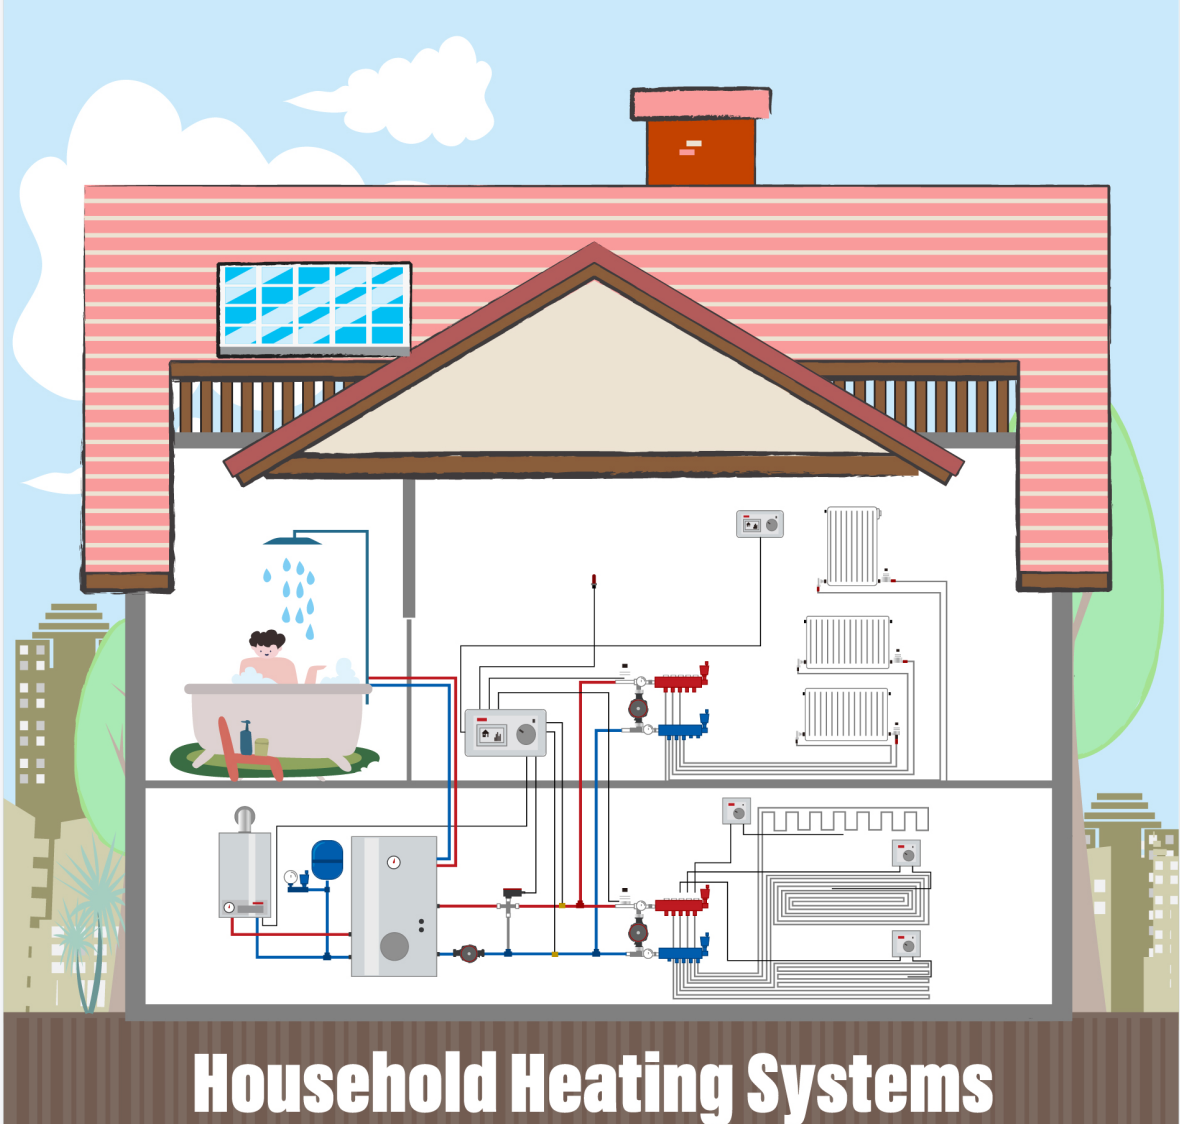 How to upgrade the existing boiler systems with minimum cost?cid=43